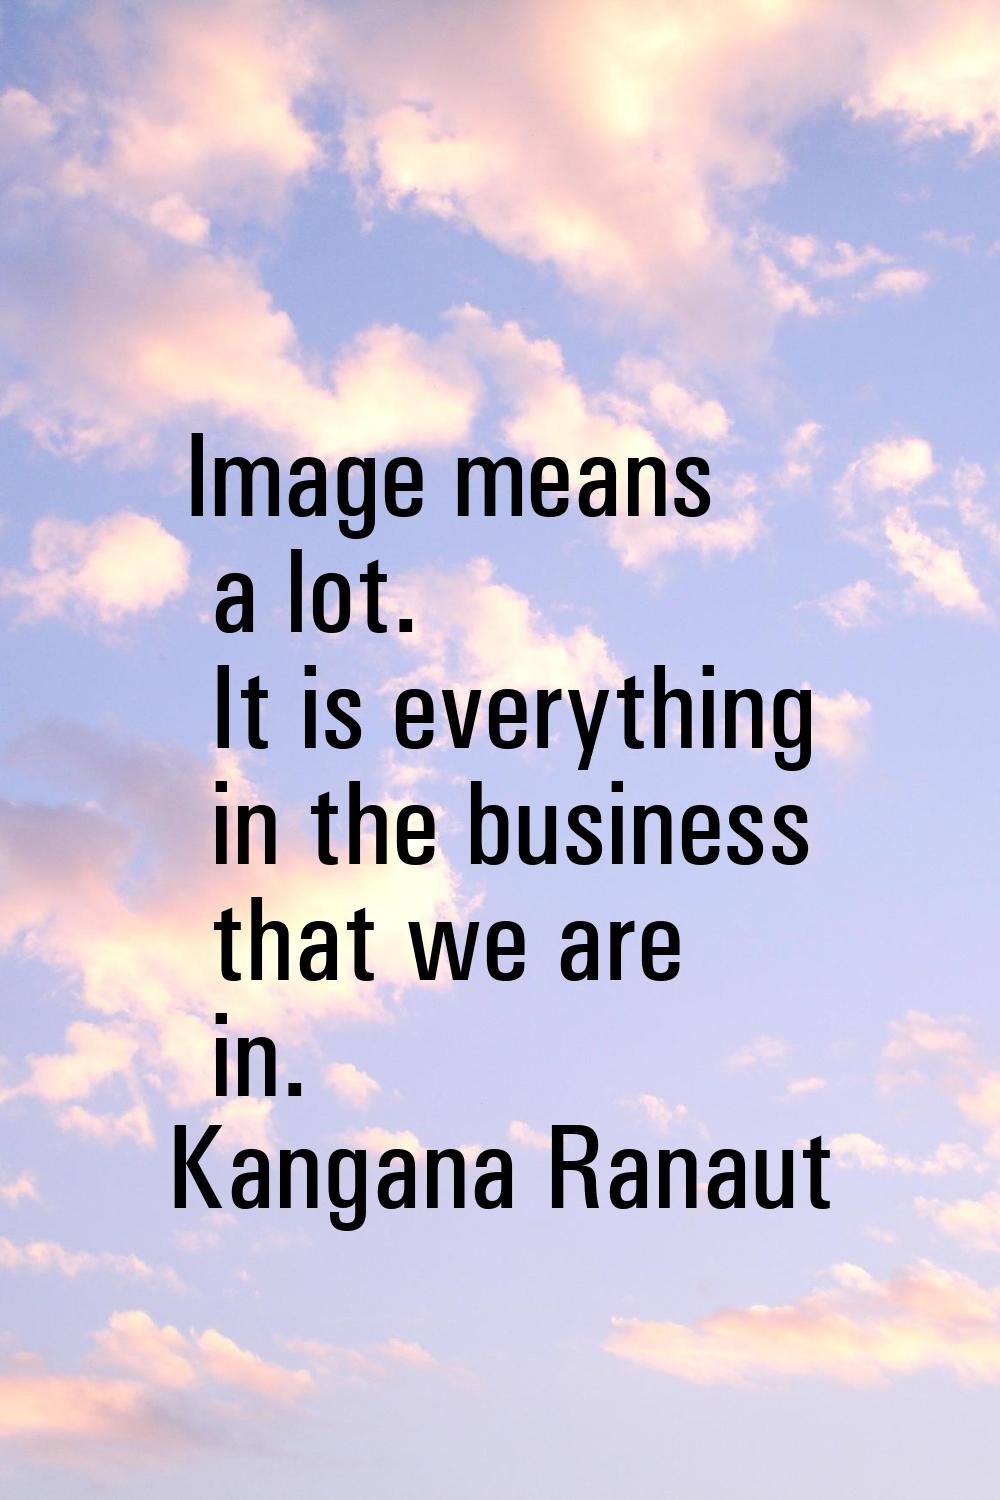 Image means a lot. It is everything in the business that we are in.